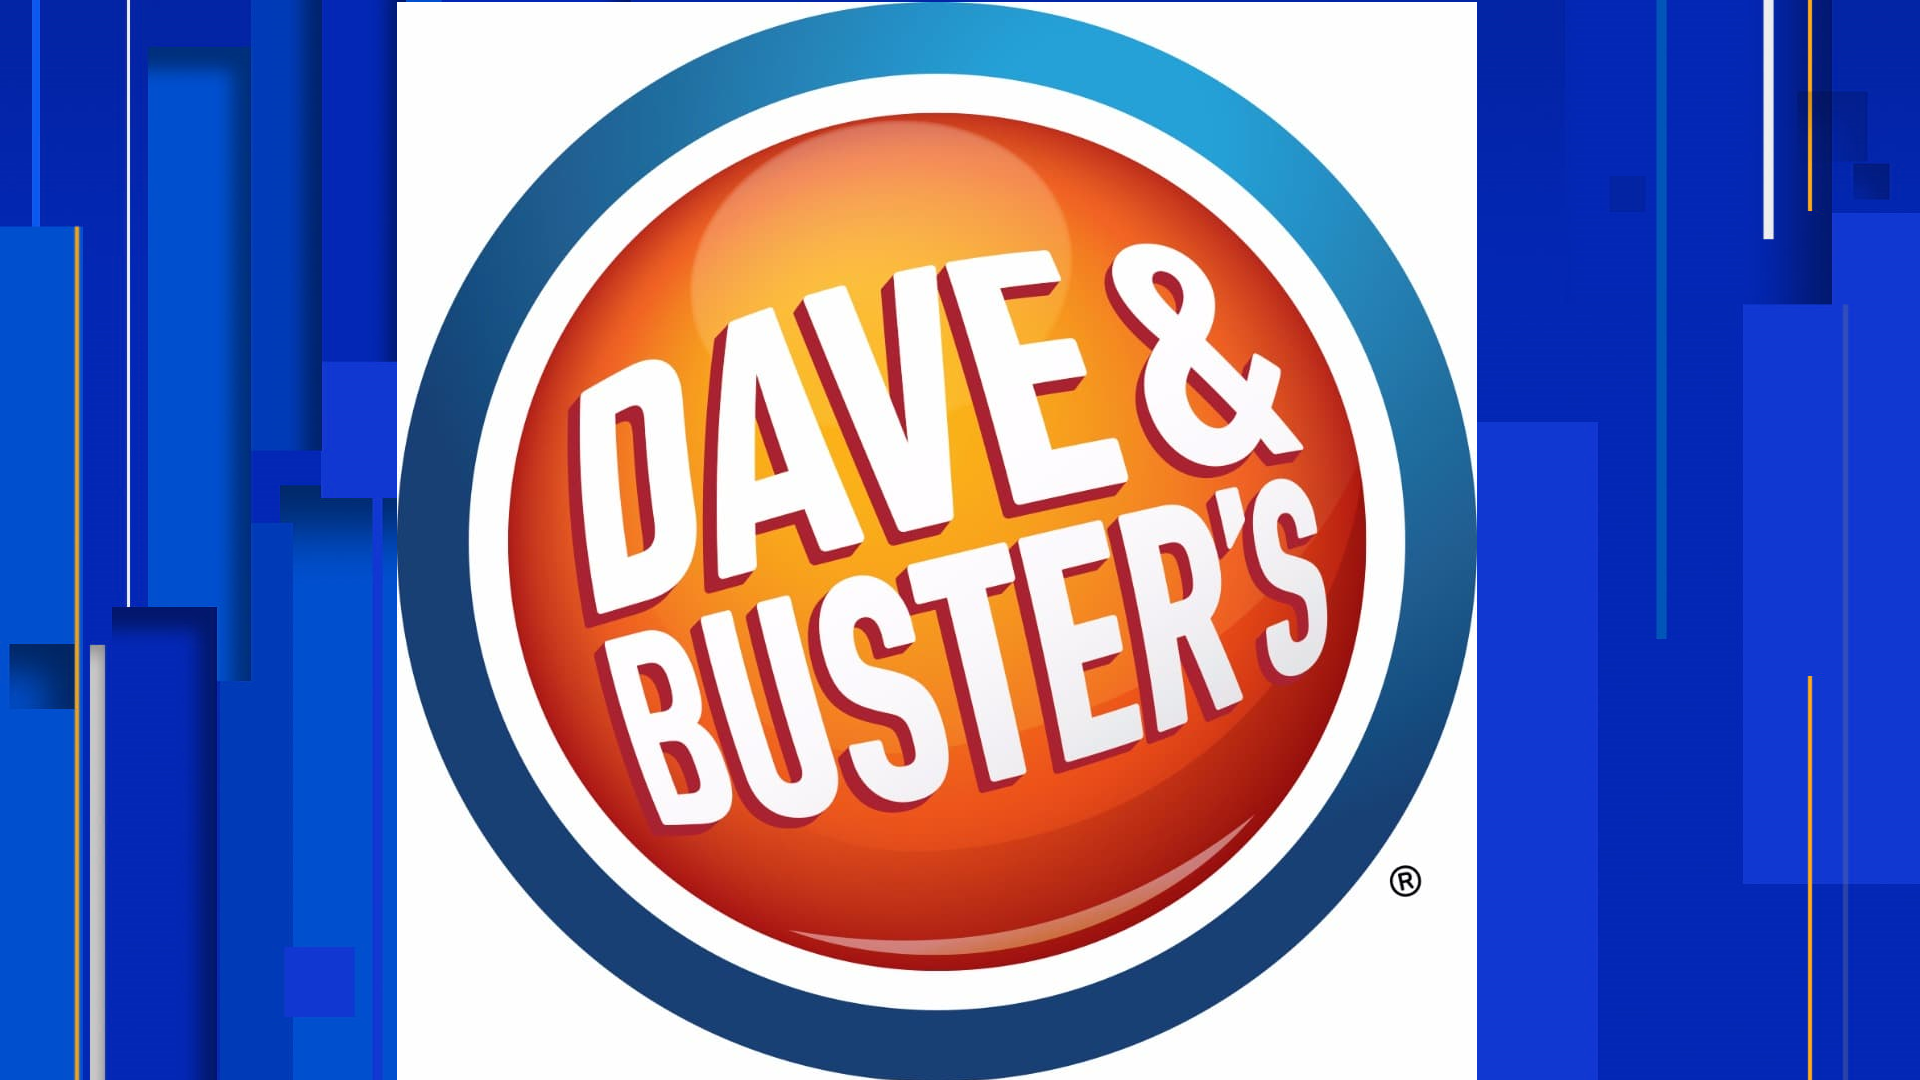 James Buster Corley, the remaining co-founder of Dave & Buster's